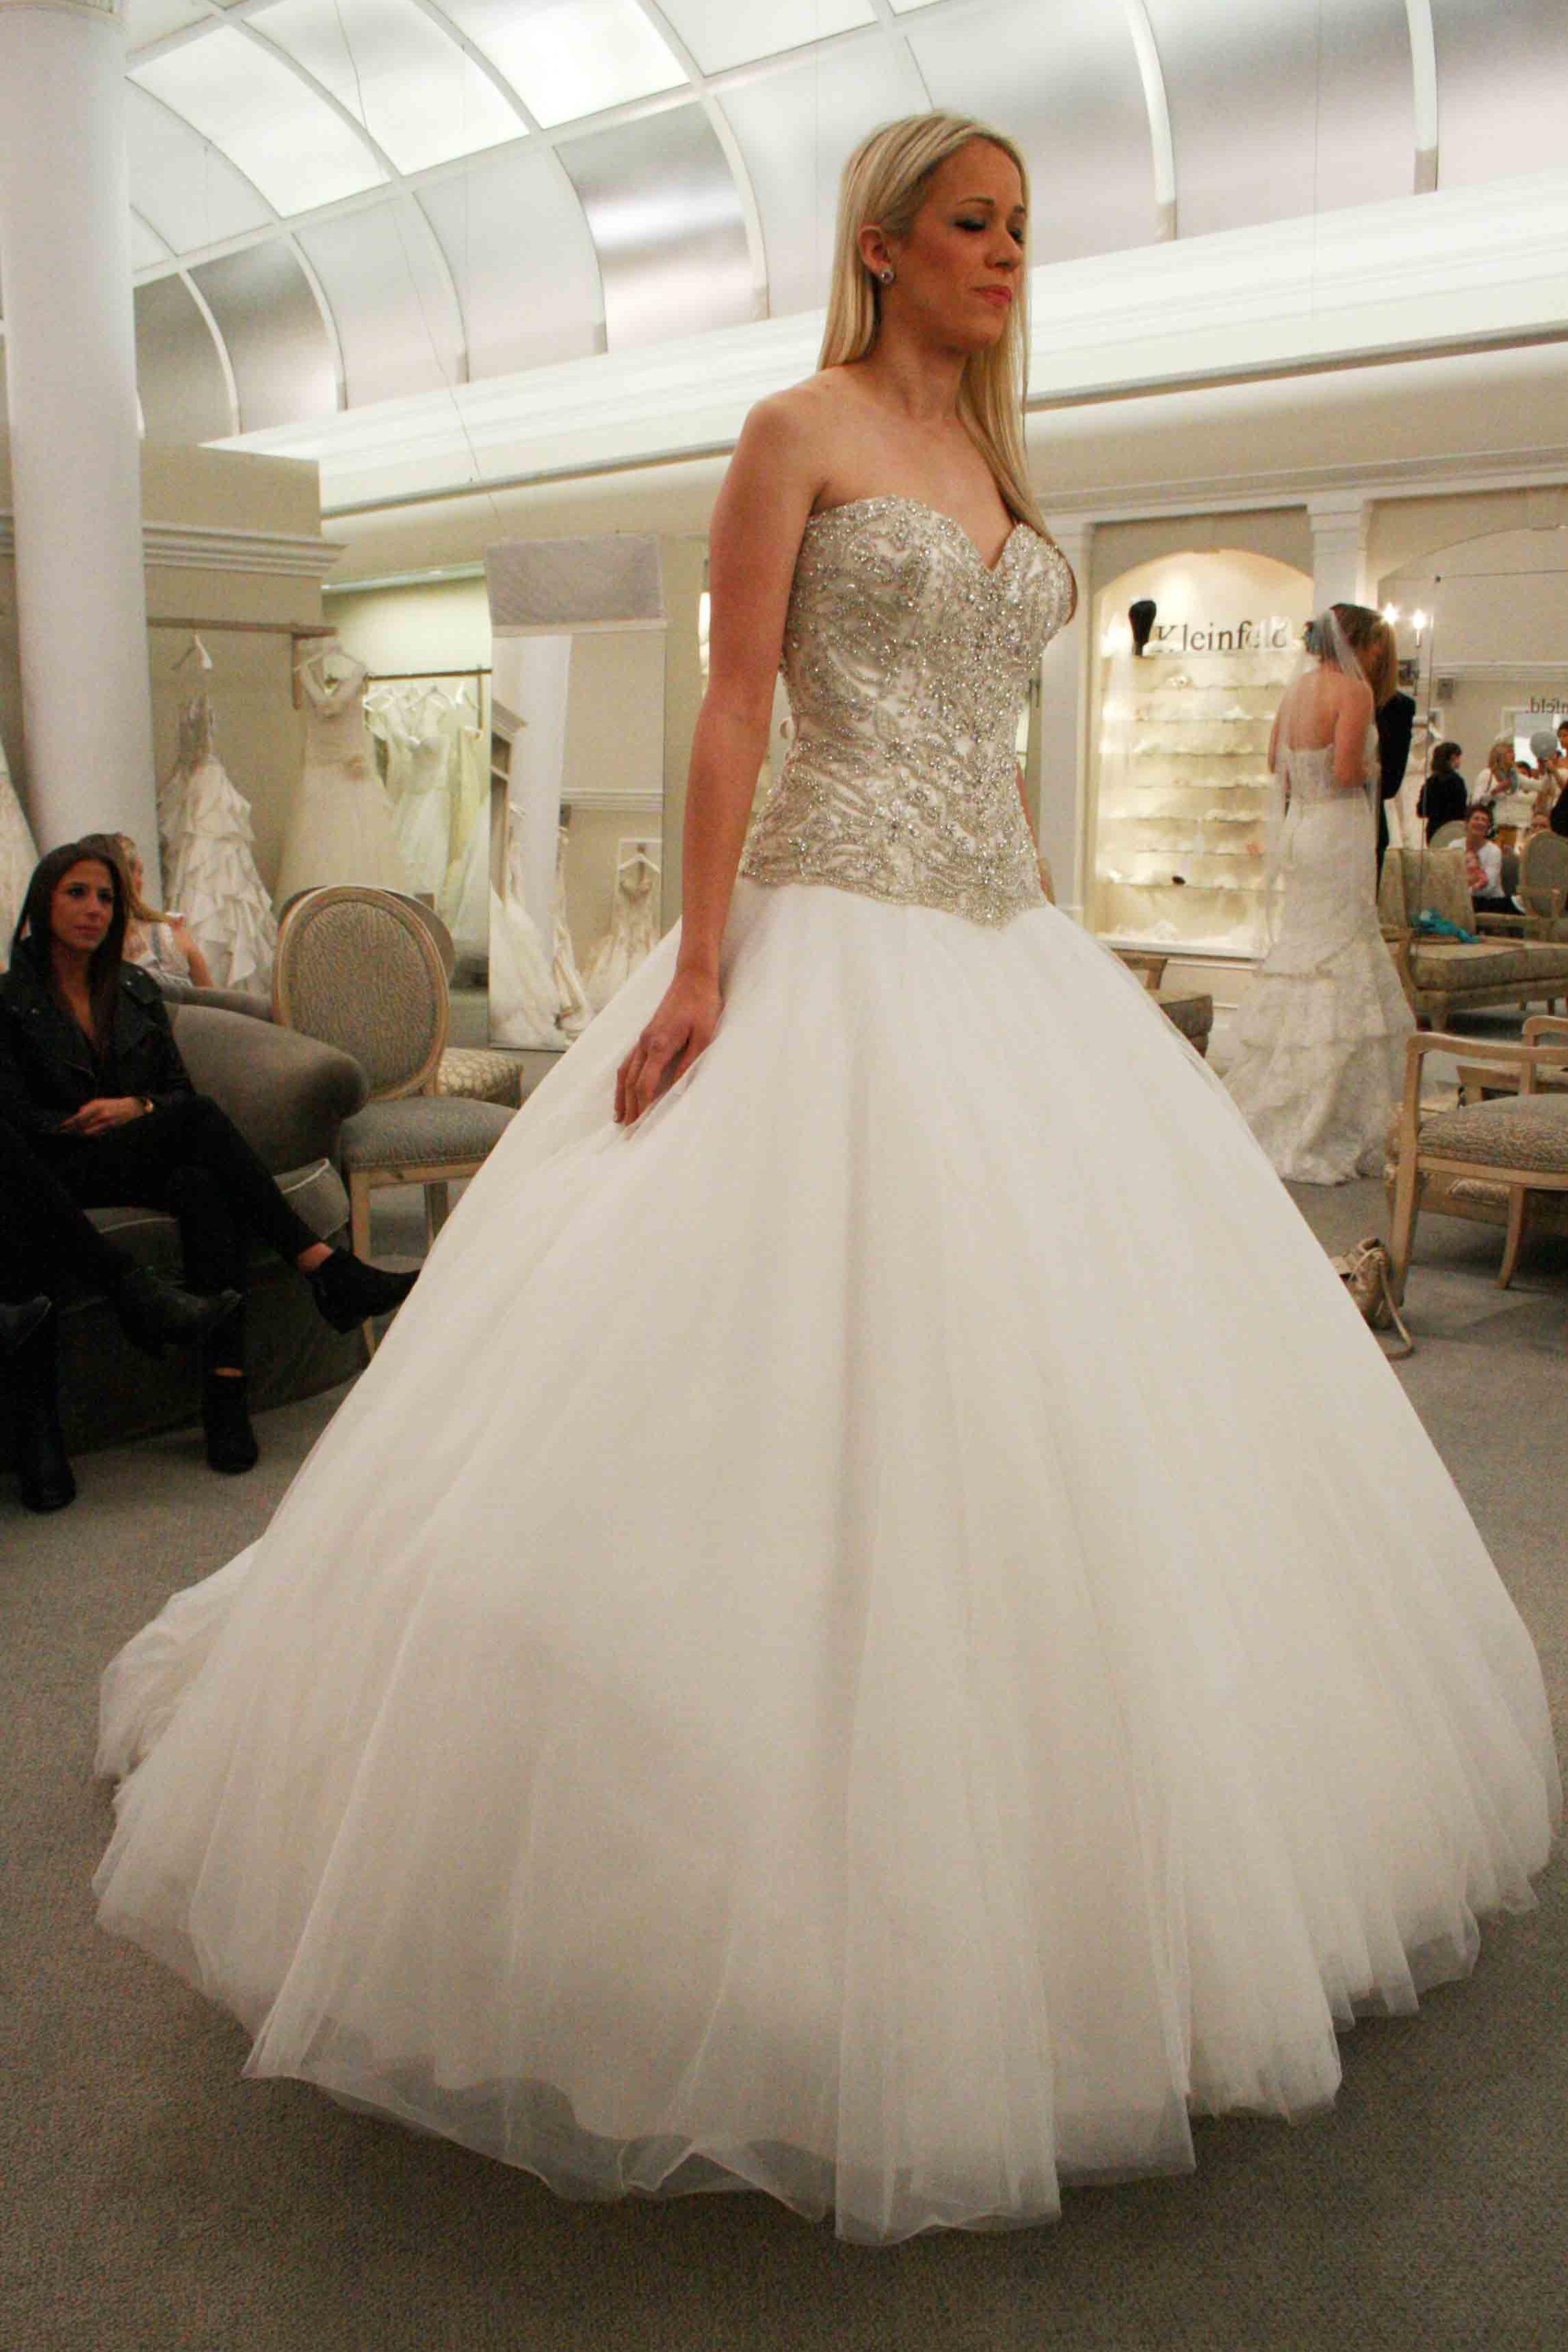 Season 11 Featured Wedding Dresses Part 7 Say Yes To The Dress Tlc 5371